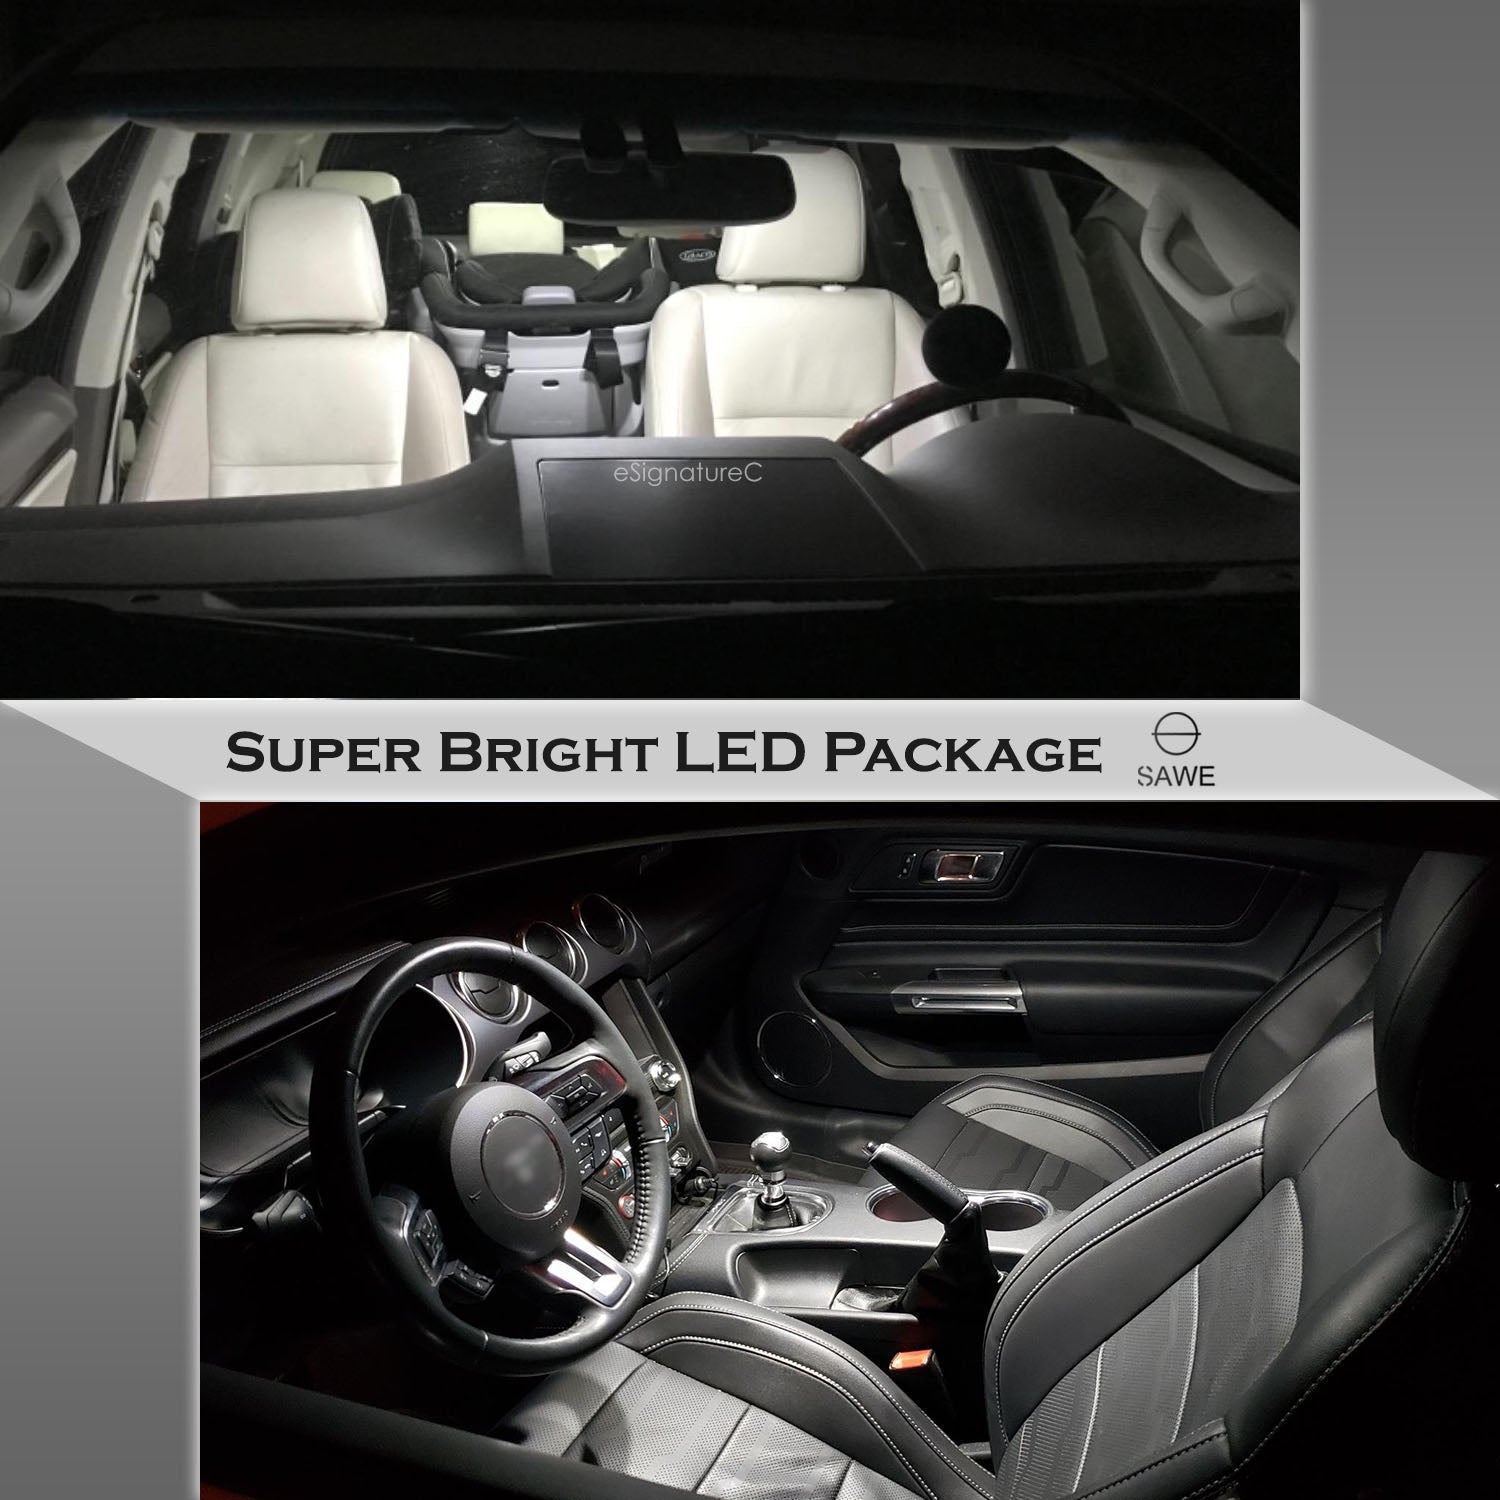 For Lexus GS300 GS350 GS460 Interior LED Lights - Dome & Map Light Bulbs Package Kit for 2006 - 2011 - White